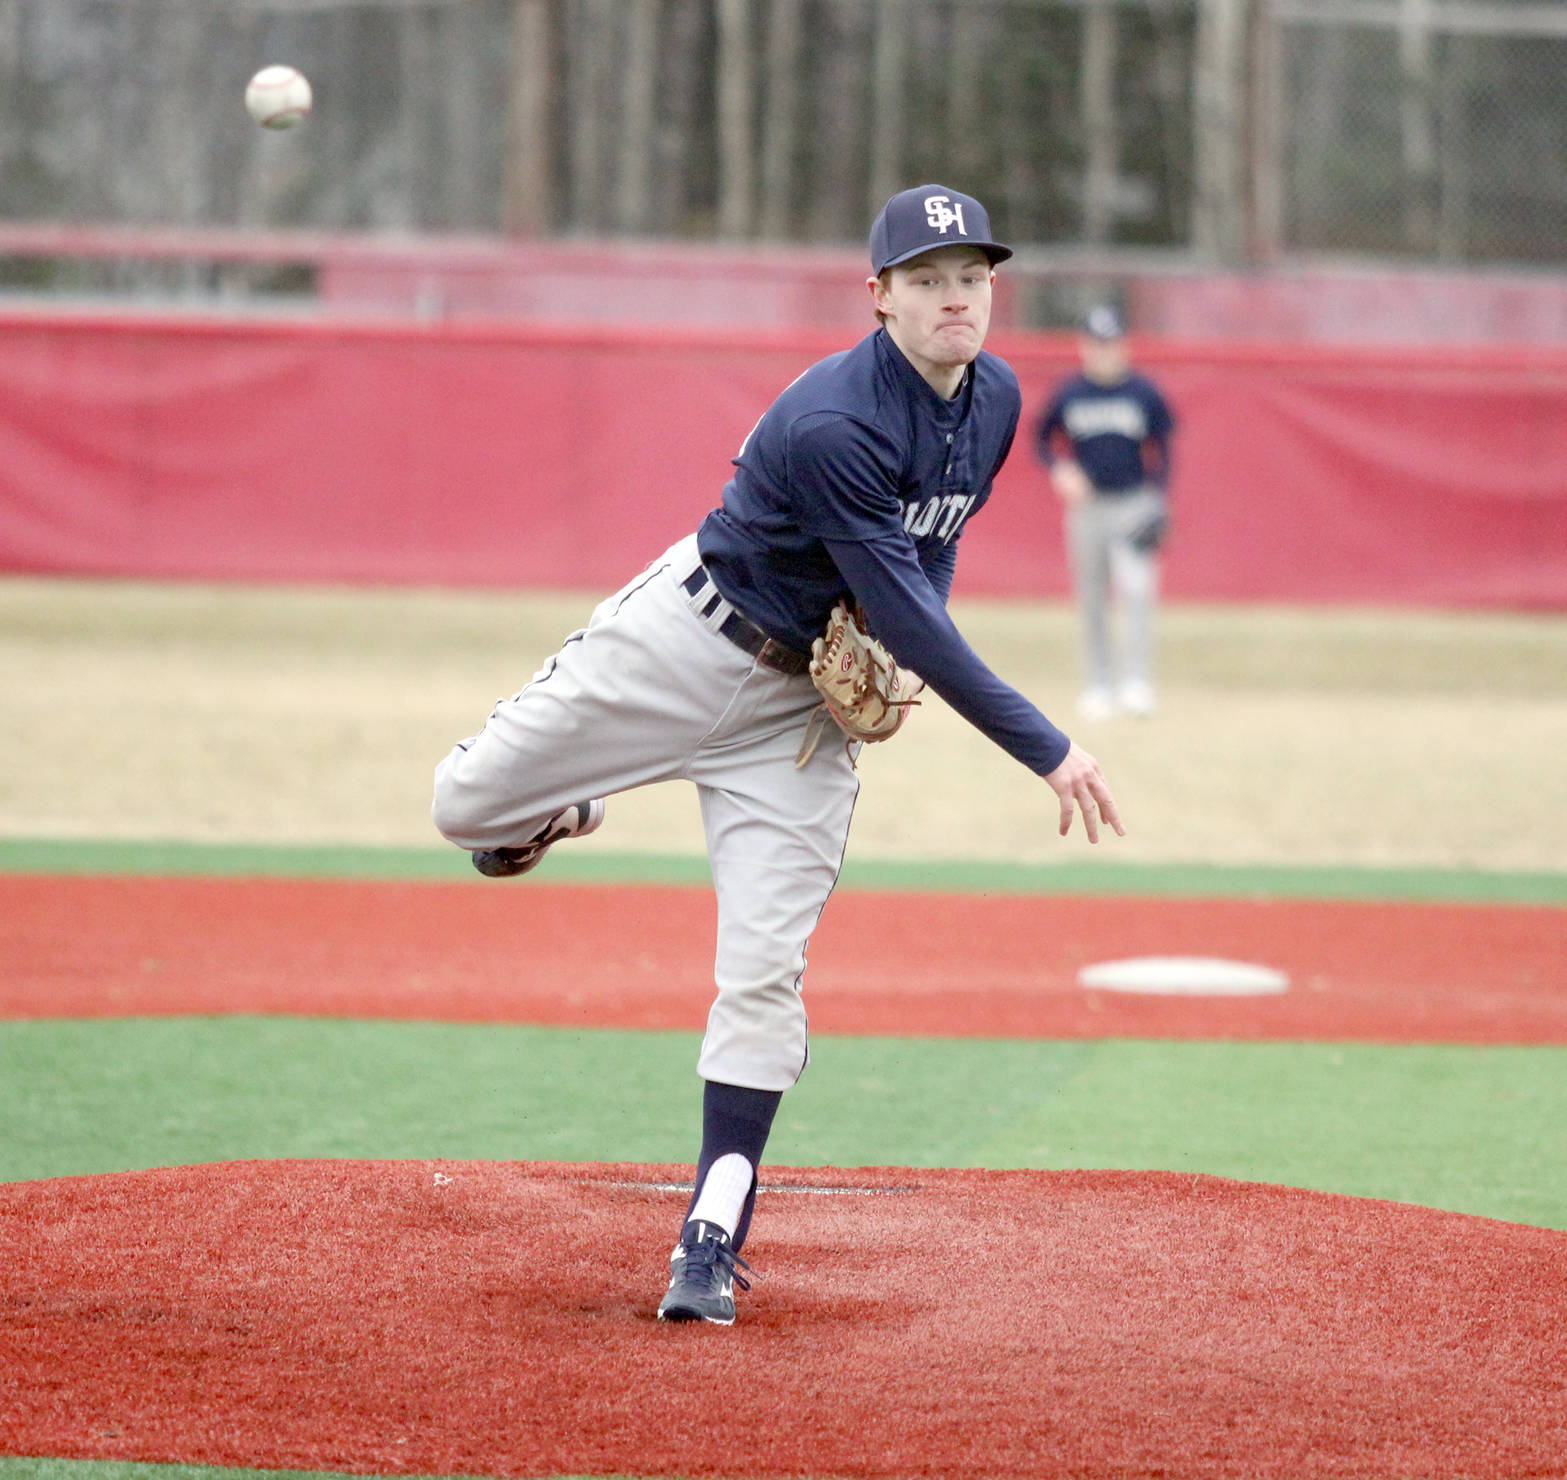 Soldotna’s Jeremy Kupferschmid releases a pitch during a 6-4 loss to the Colony Knights on Friday, April 27, 2018, at Wasilla HIgh School. (Photo by Jeremiah Bartz/Frontiersman)